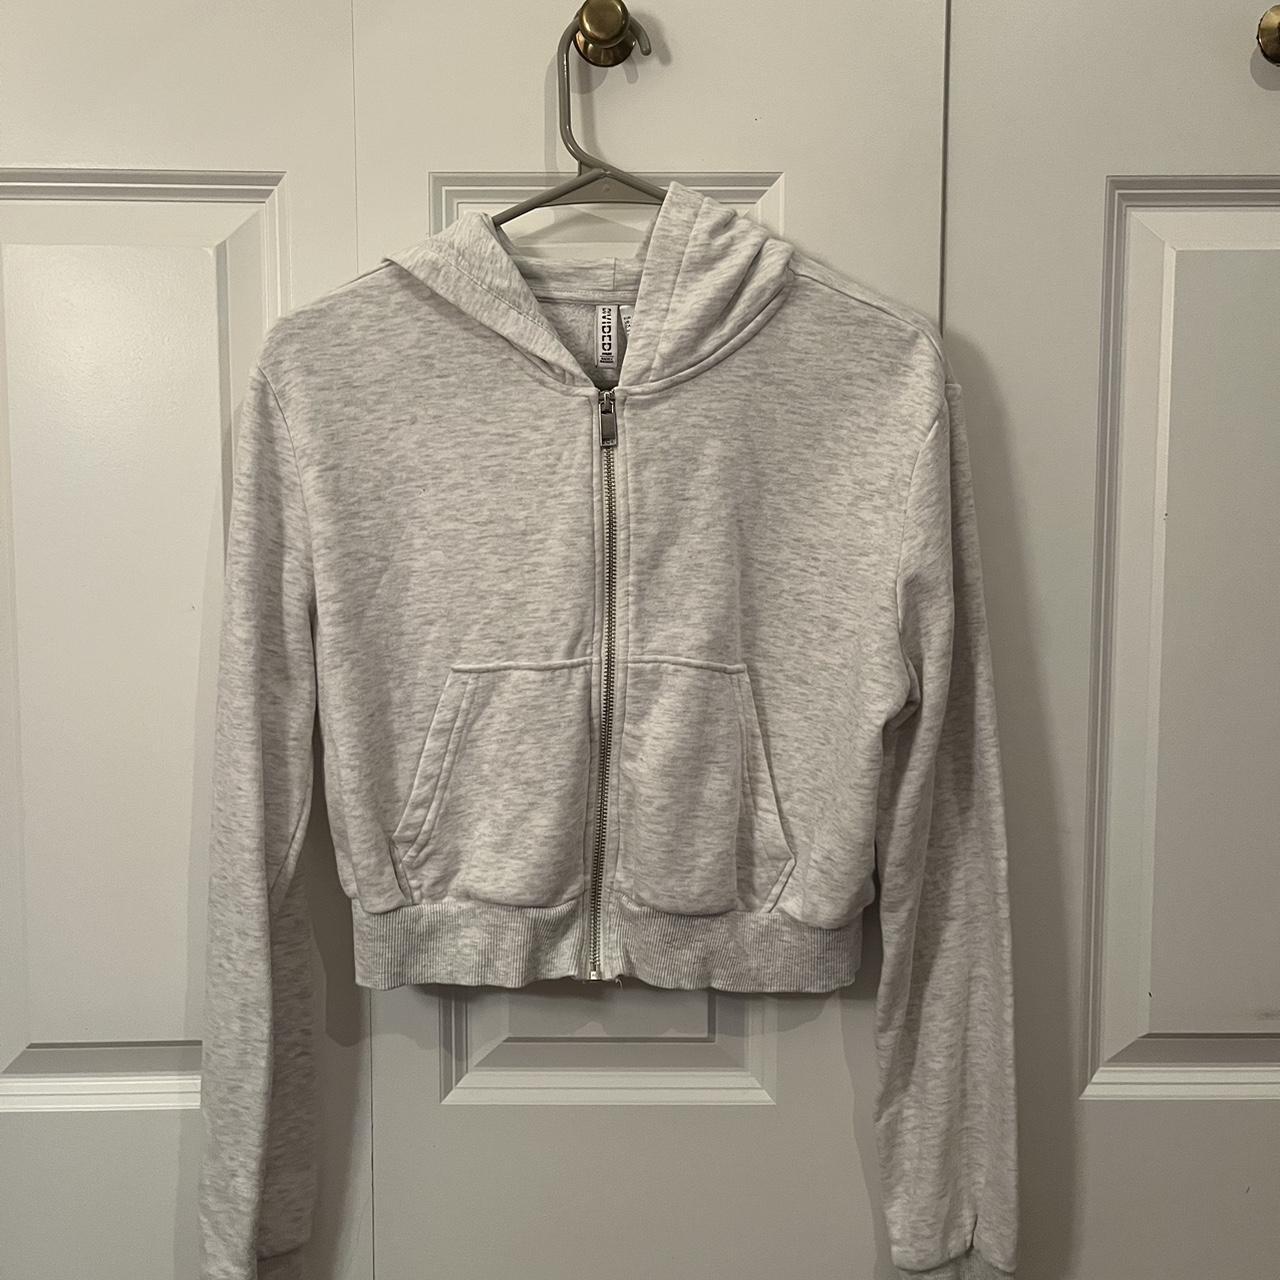 H&M Cropped zip up hoodie WORN ONCE AVAILABLE TO BE... - Depop